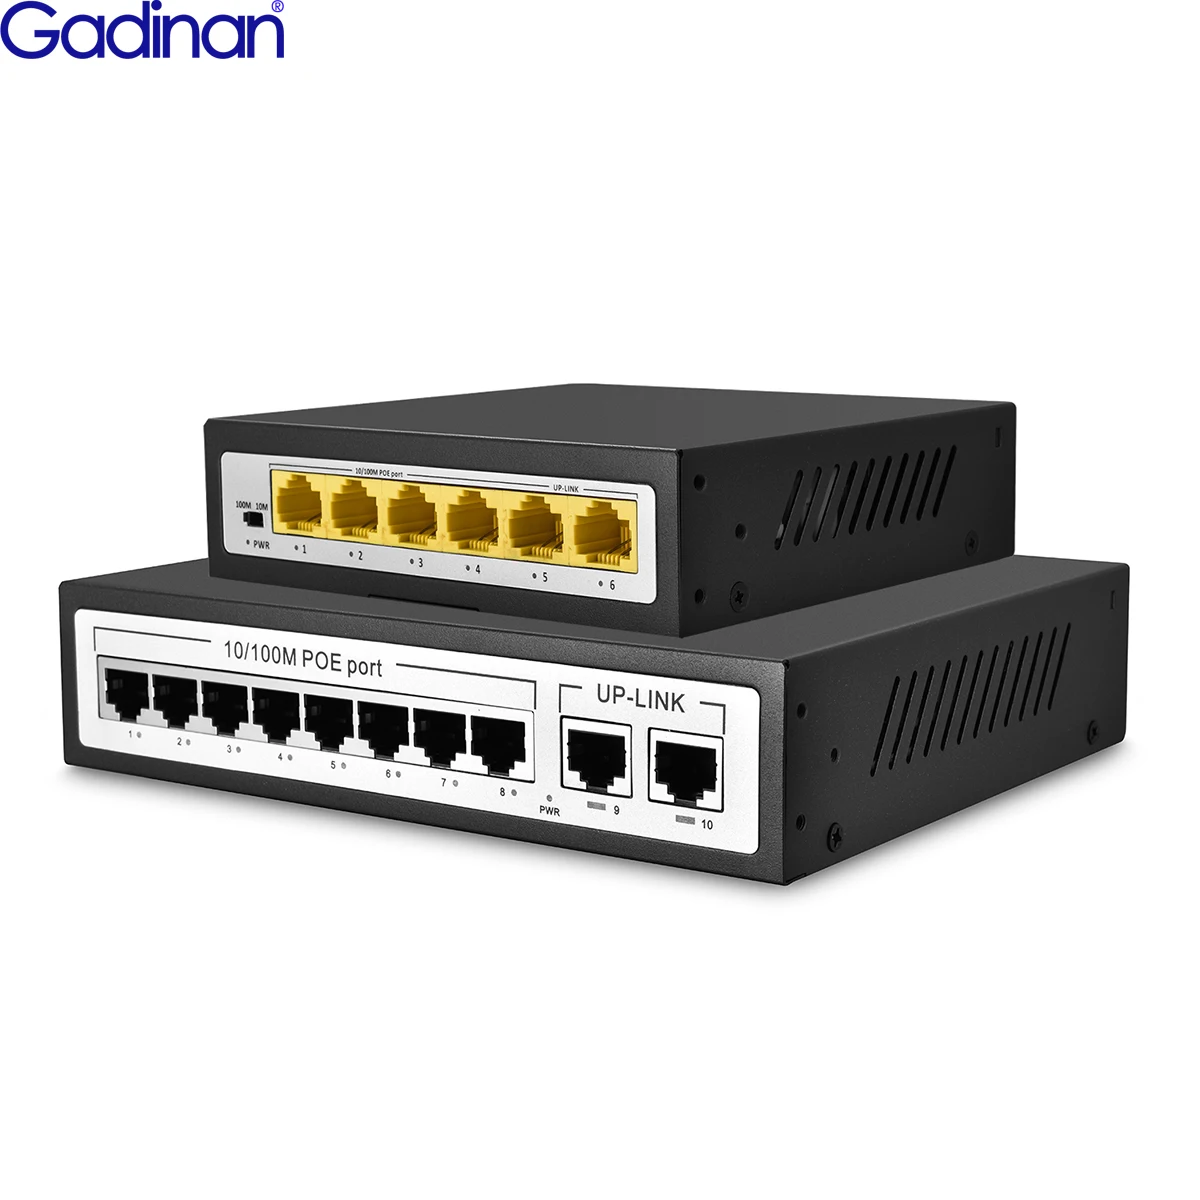 gadinan-4ch-8ch-48v-standard-poe-switch-suitable-ieee8023af-at-poe-powered-rj45-devices-ip-camera-wireless-cctv-camera-system